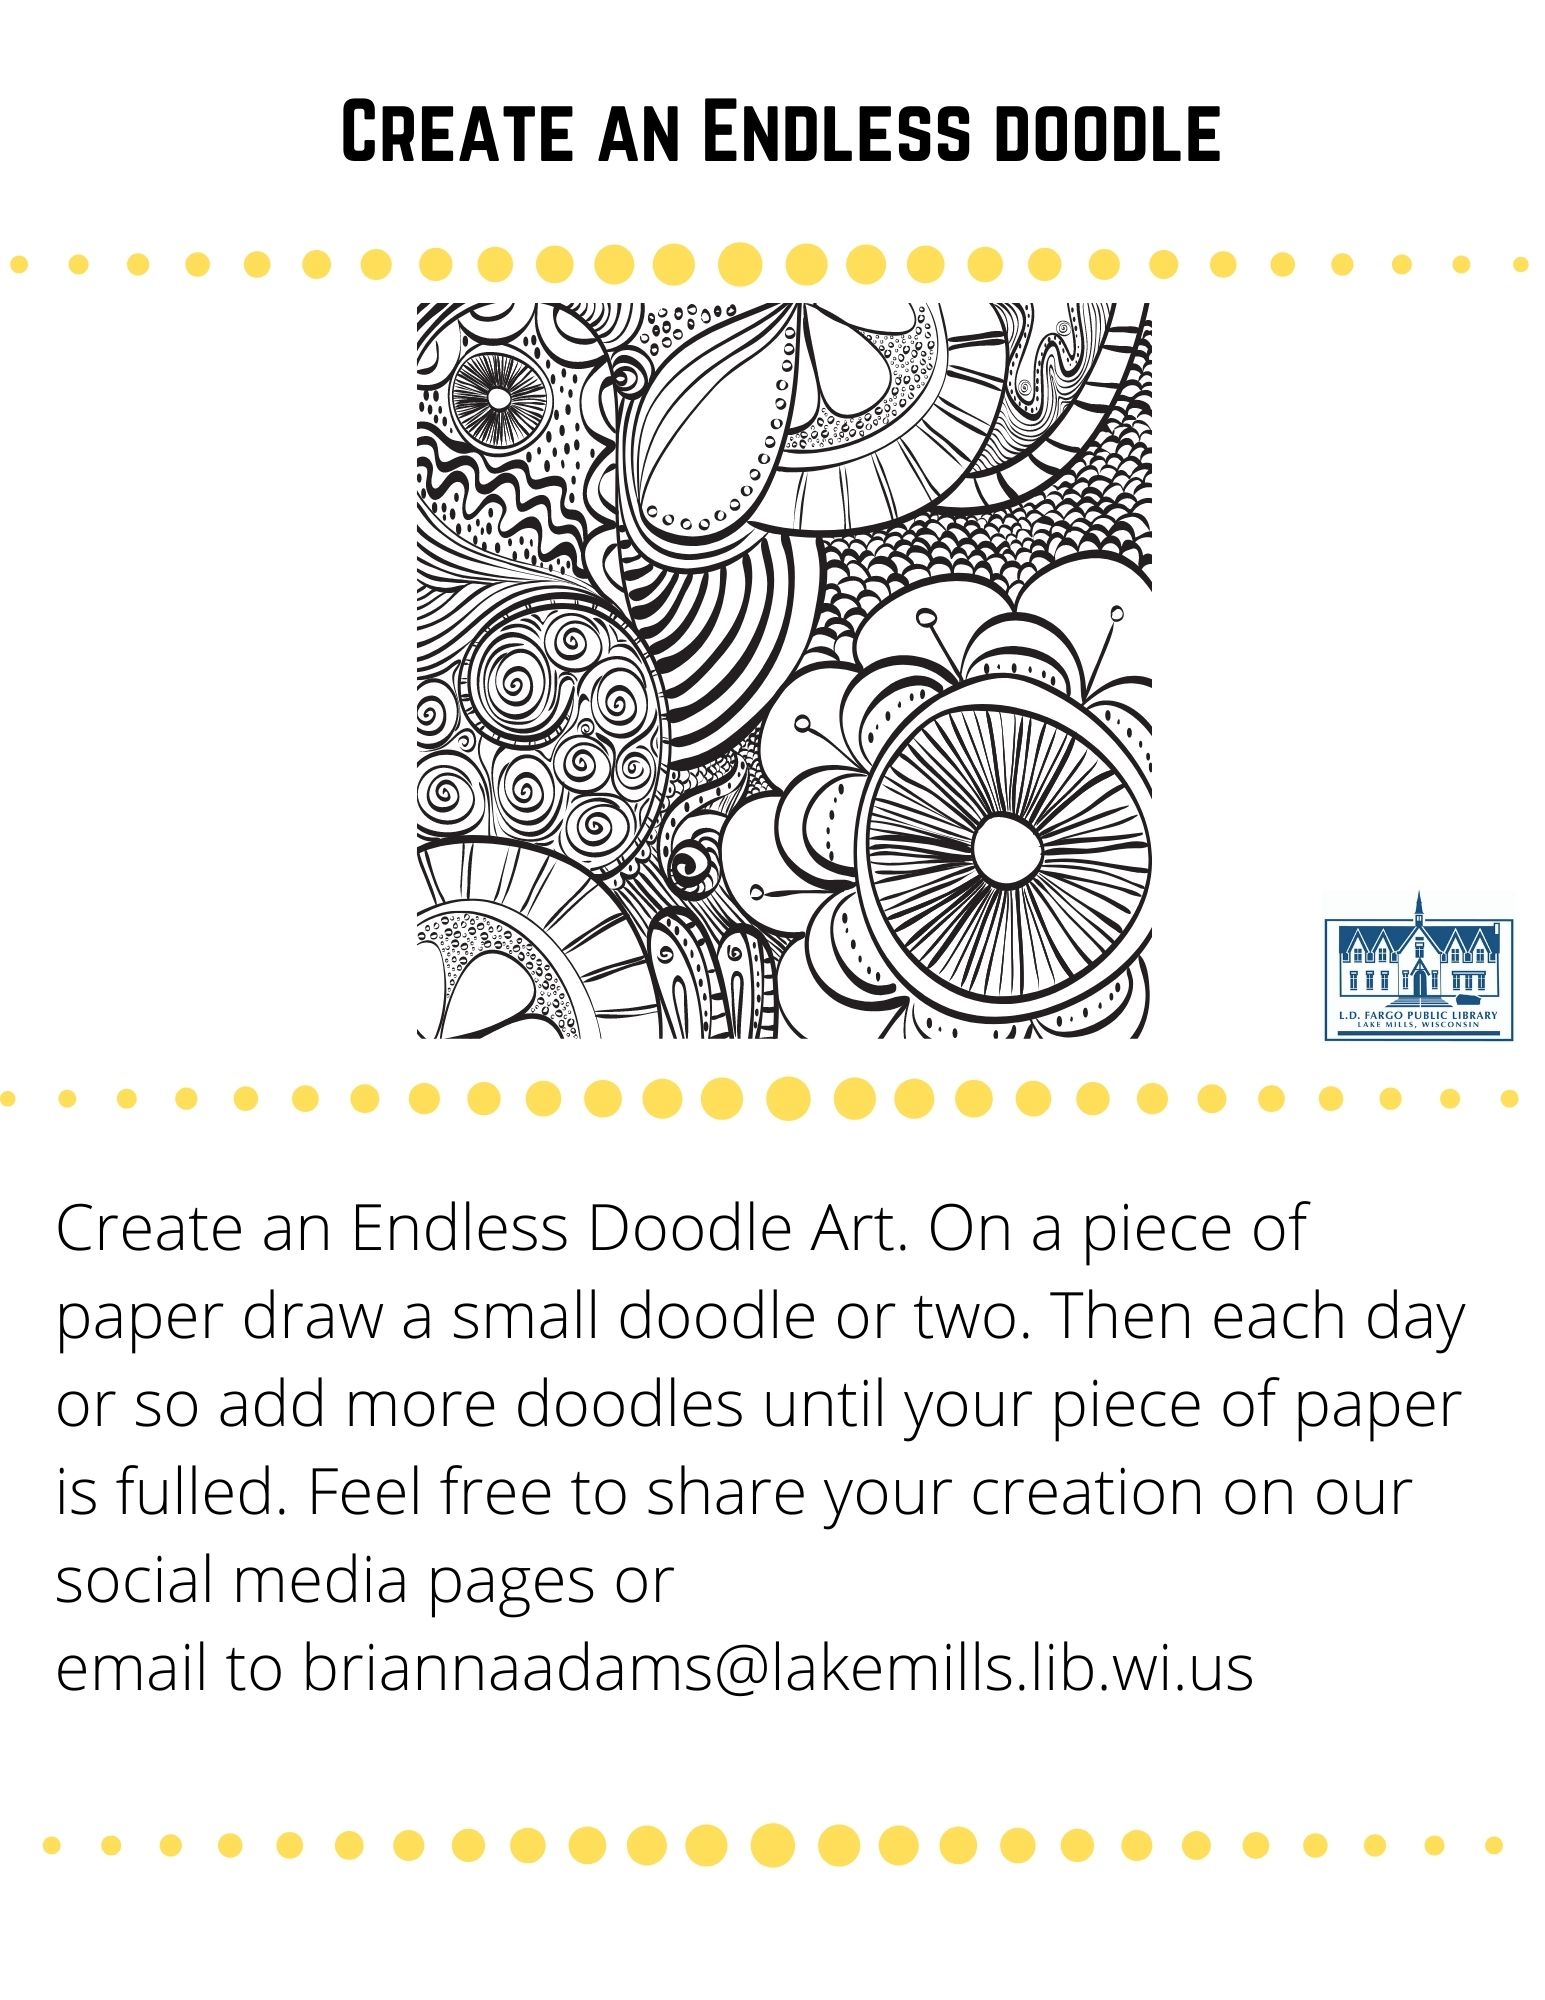 Create an Endless doodle  Create an Endless Doodle Art. On a piece of paper, draw a small doodle or two. Then each day or so add more doodles until your piece of paper is full. Feel free to share your creation on our social media pages or  email to briannaadams@lakemills.lib.wi.us   